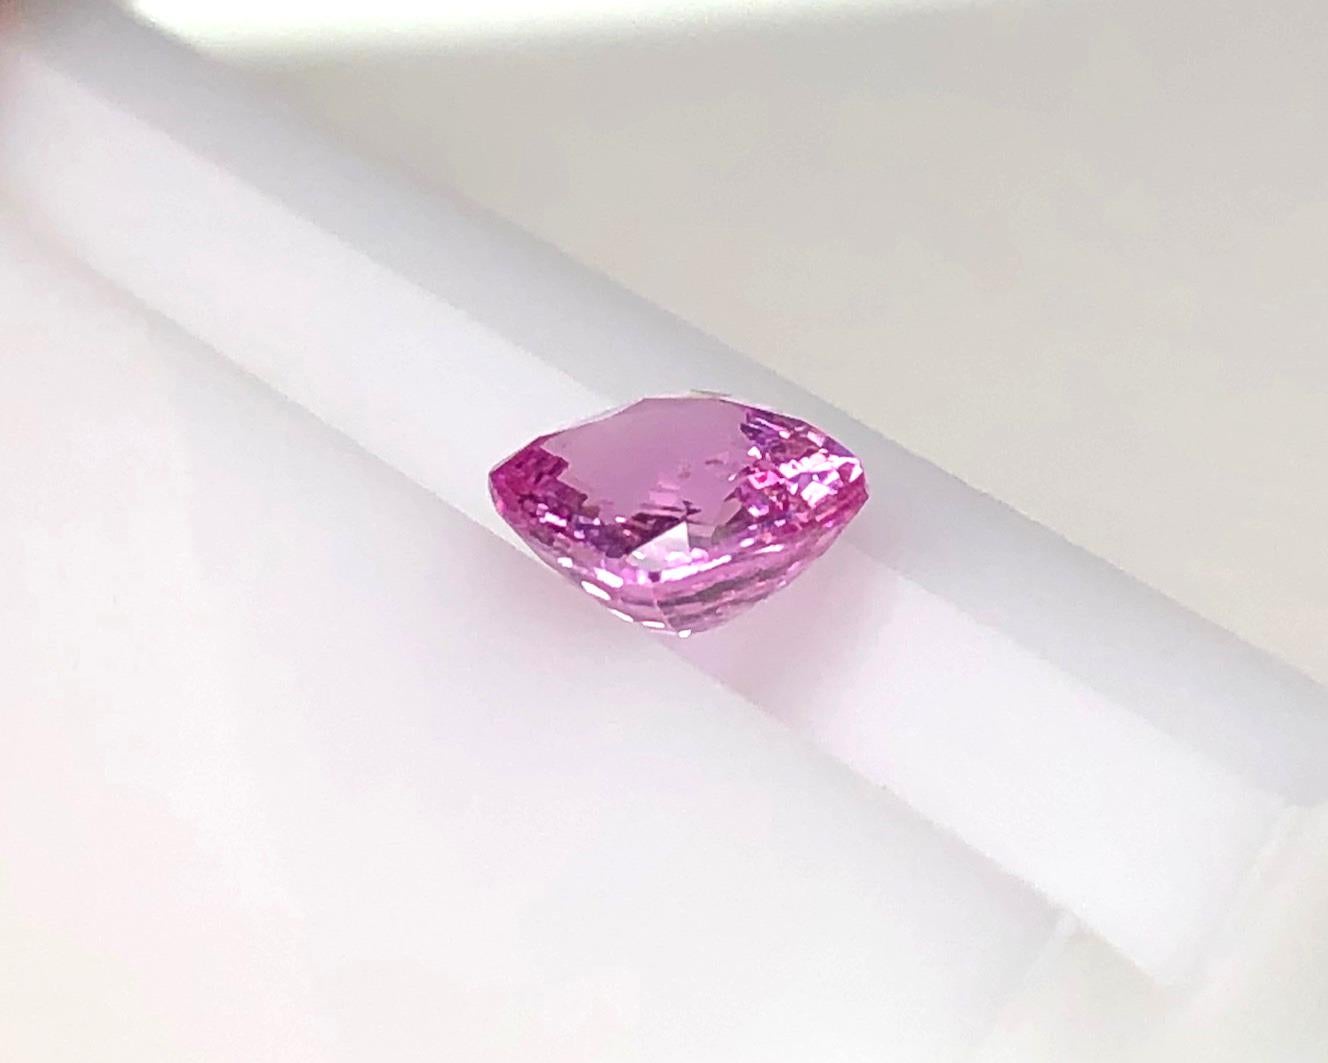 Artisan Unheated 3.11 Carat Purple Pink Sapphire, Unset Loose Gemstone, GIA Certified For Sale